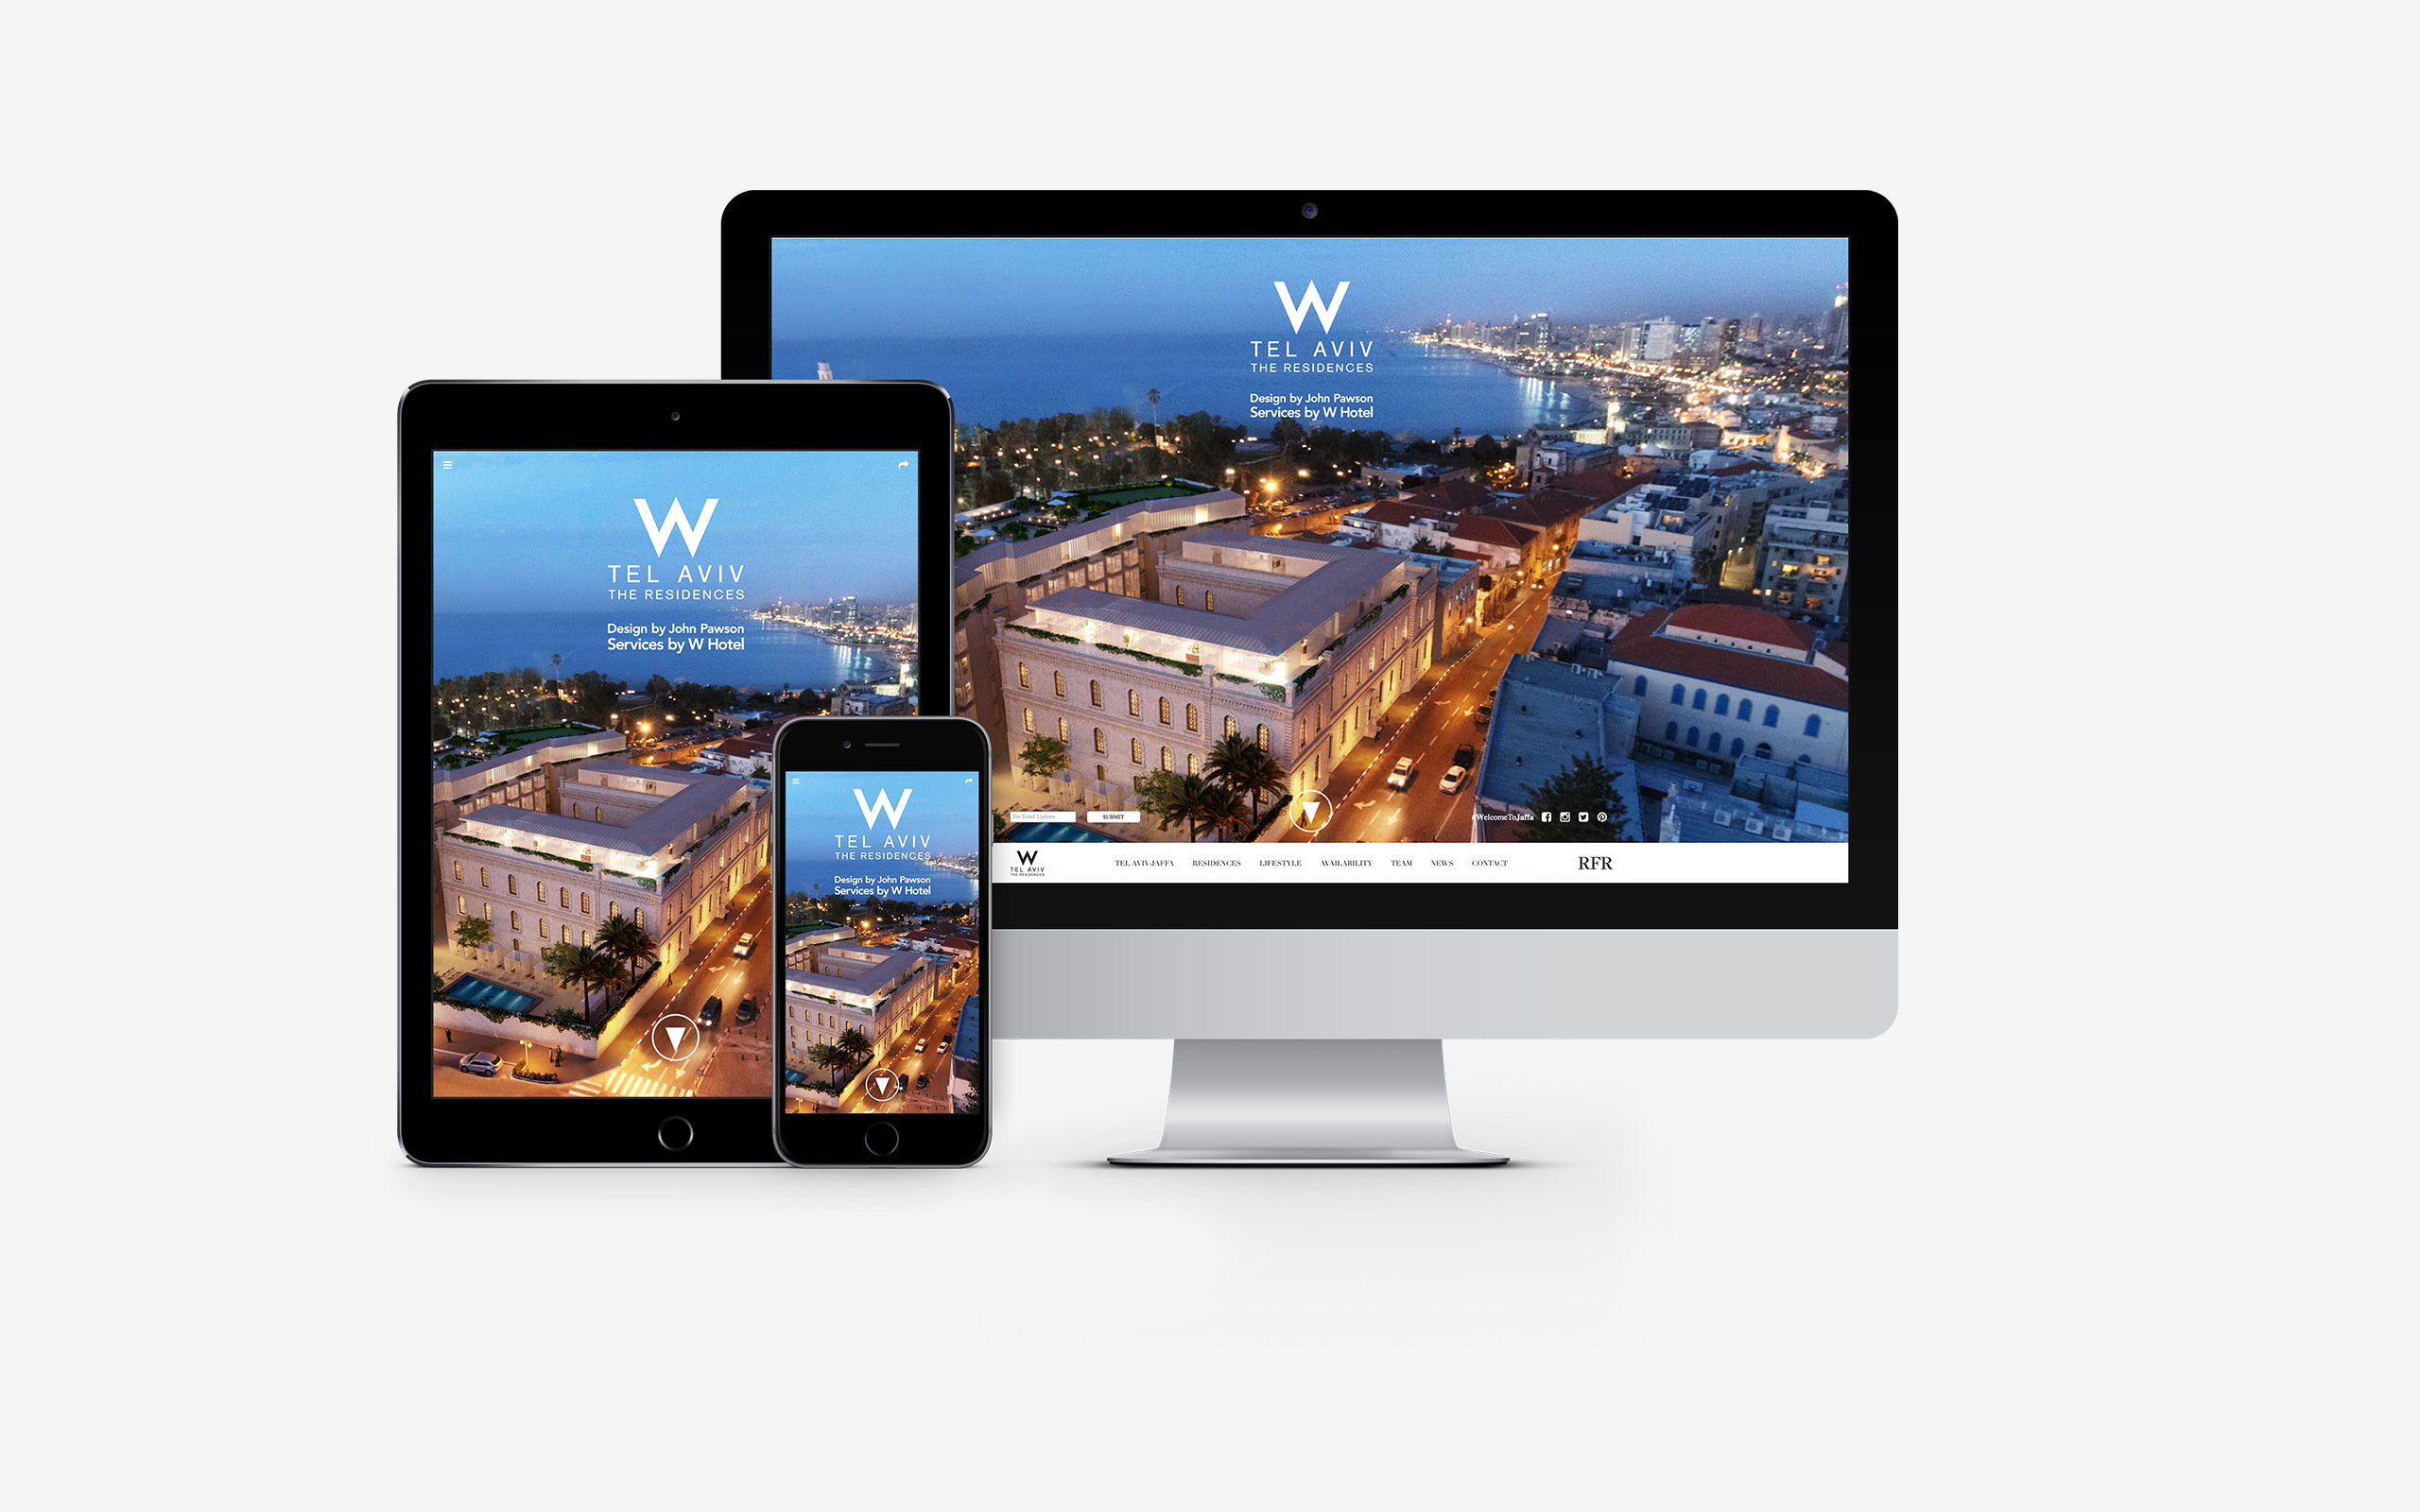 Web collateral for W Tel Aviv